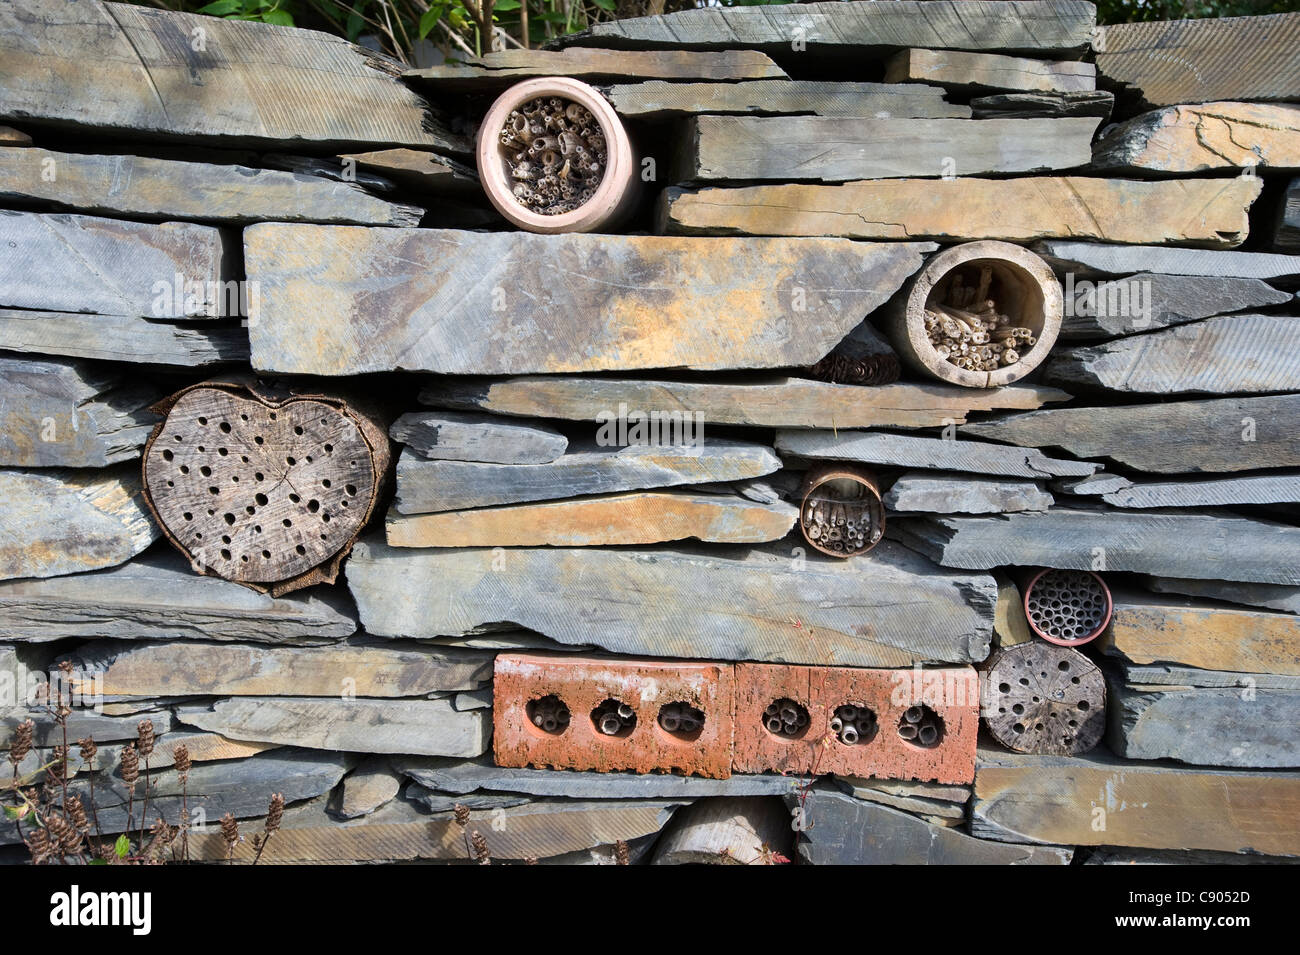 Insect hotel in a wall in The Centre for Alternative Technology, Llwyngern Quarry, Pantperthog, Machynlleth, Powys, Wales Stock Photo